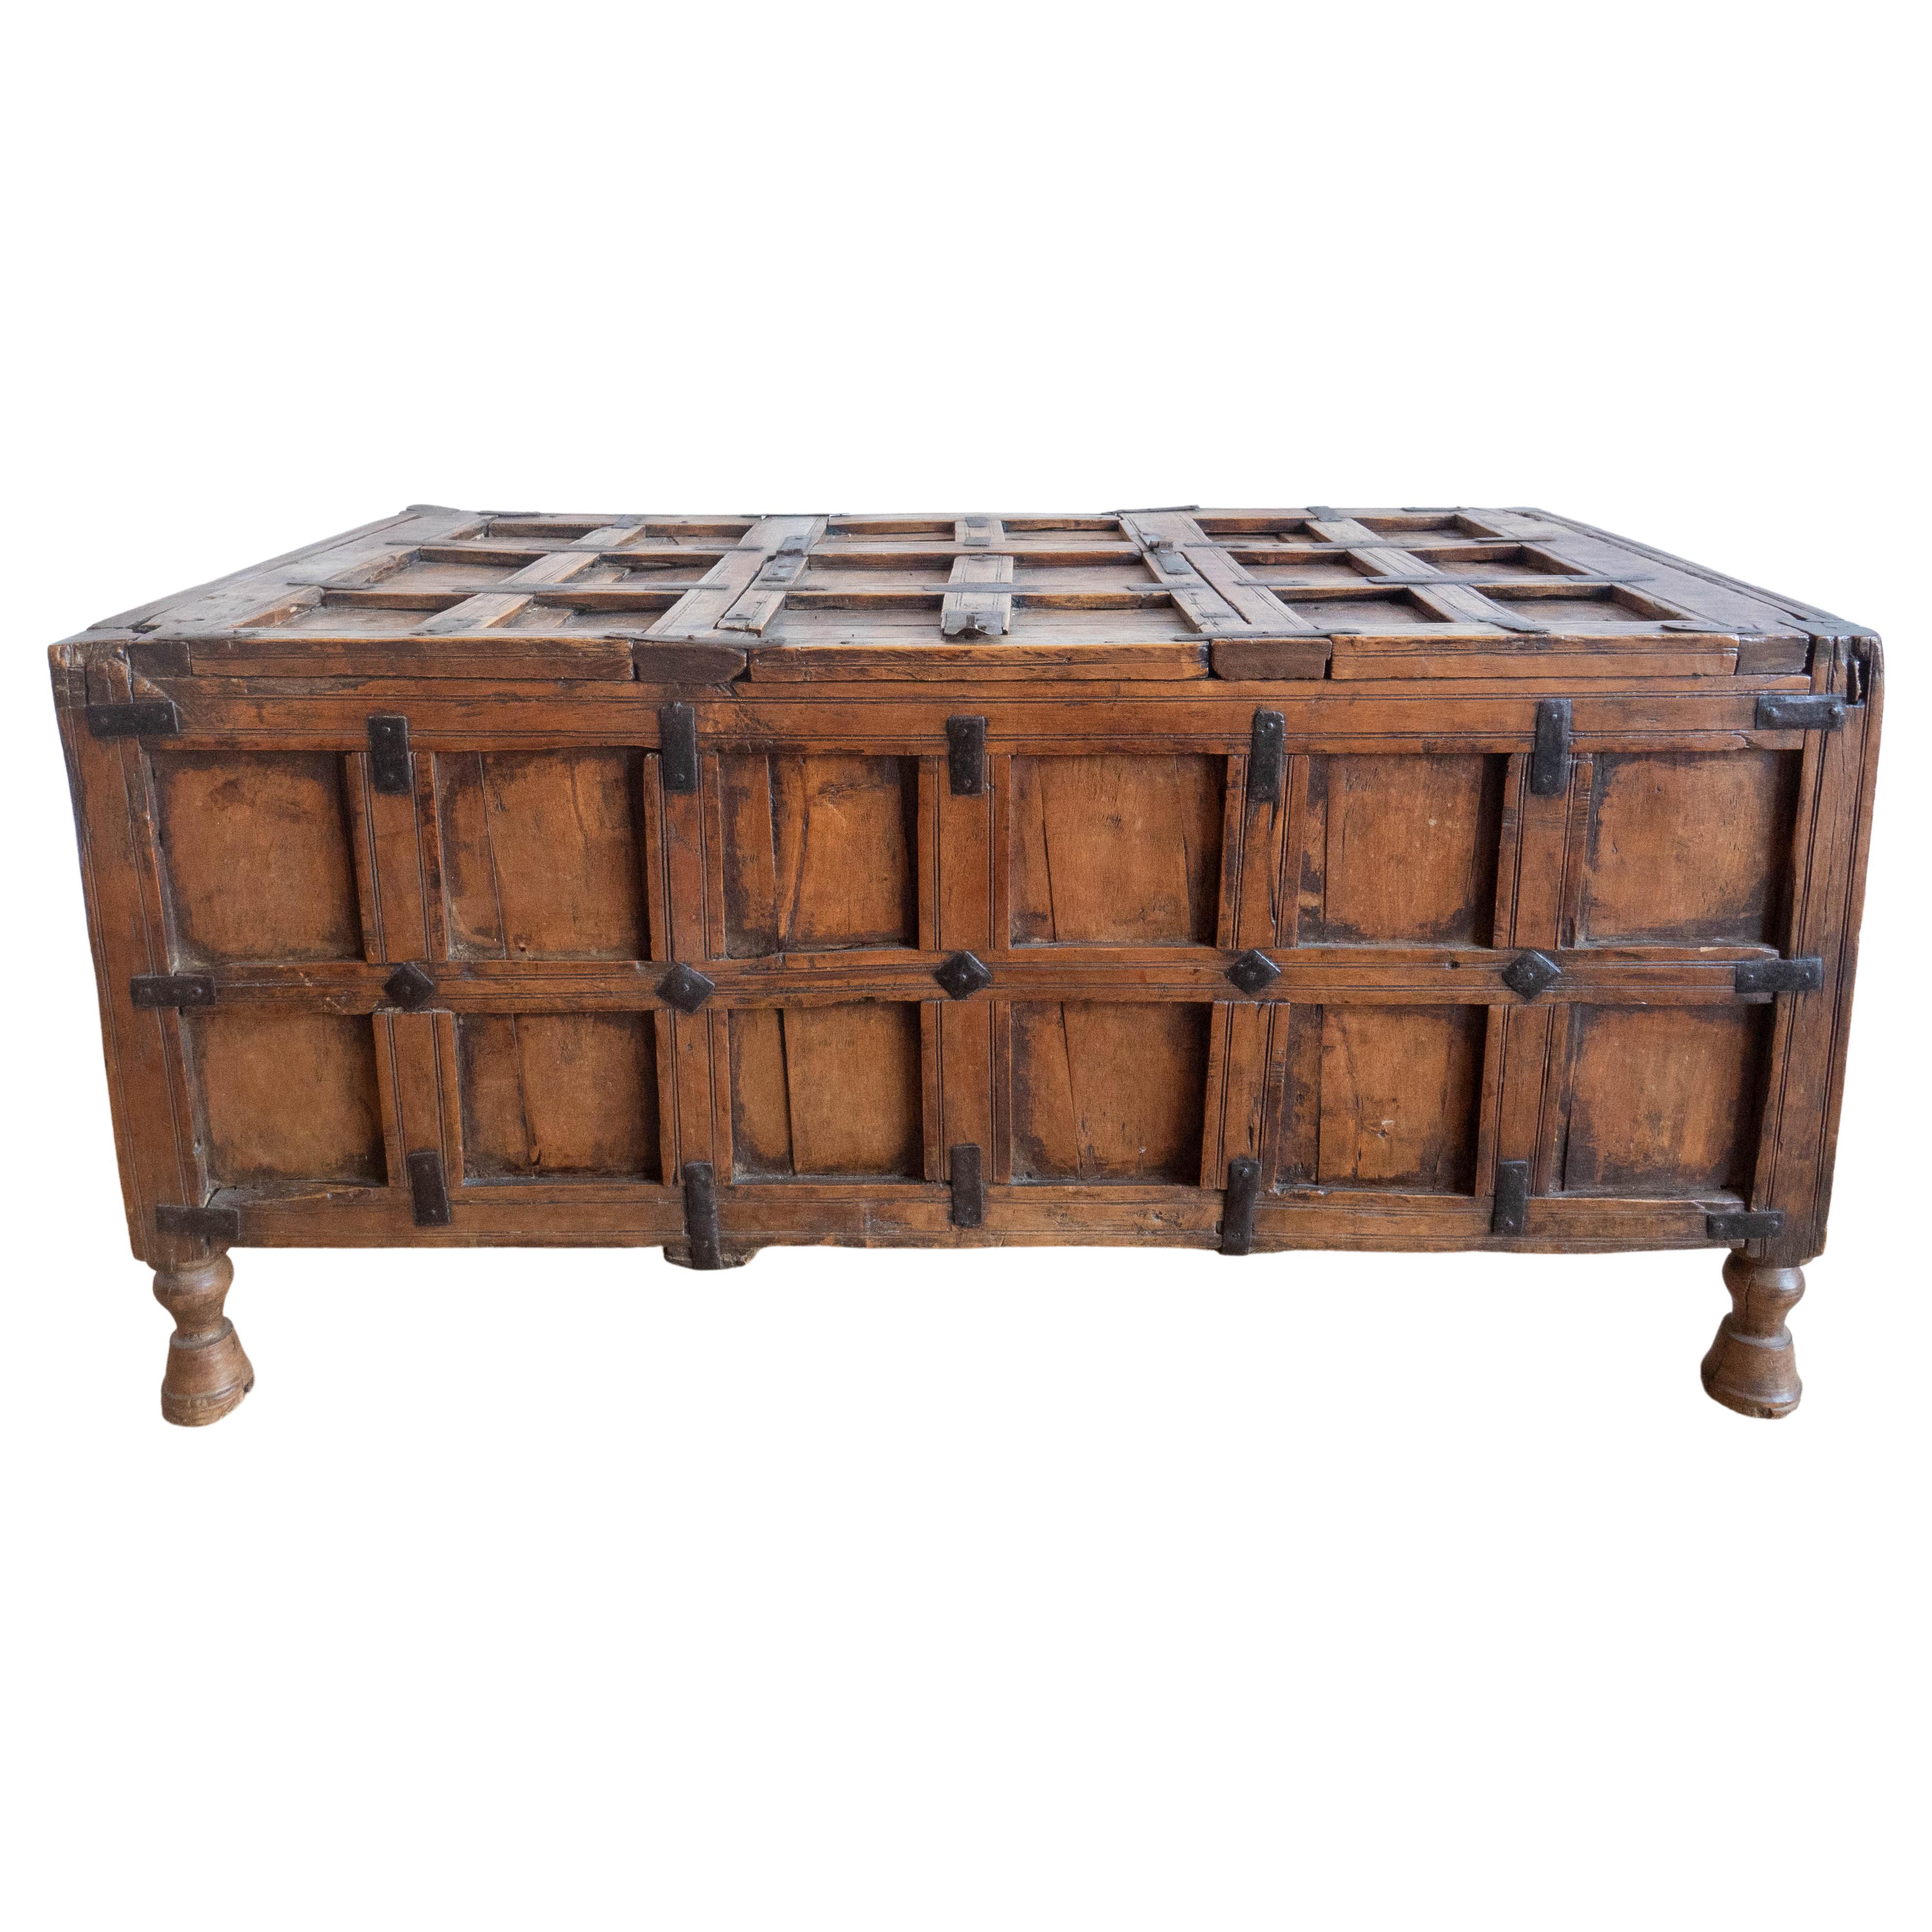 Early 19th Century Paneled Fruitwood Coffer/Trunk with Iron Accents For Sale